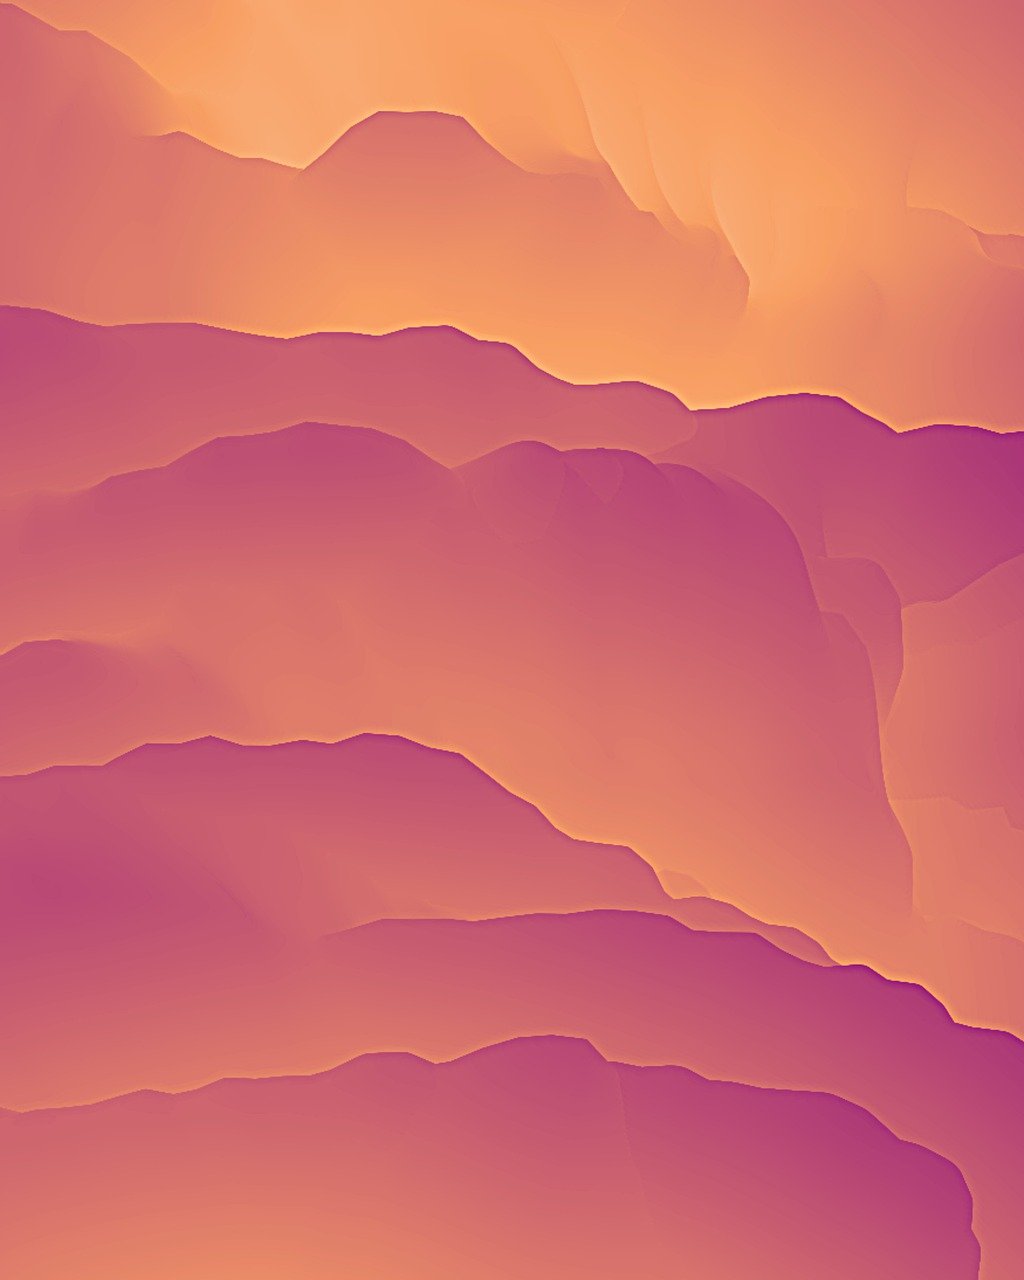 an orange and purple background that is a mixture of hills